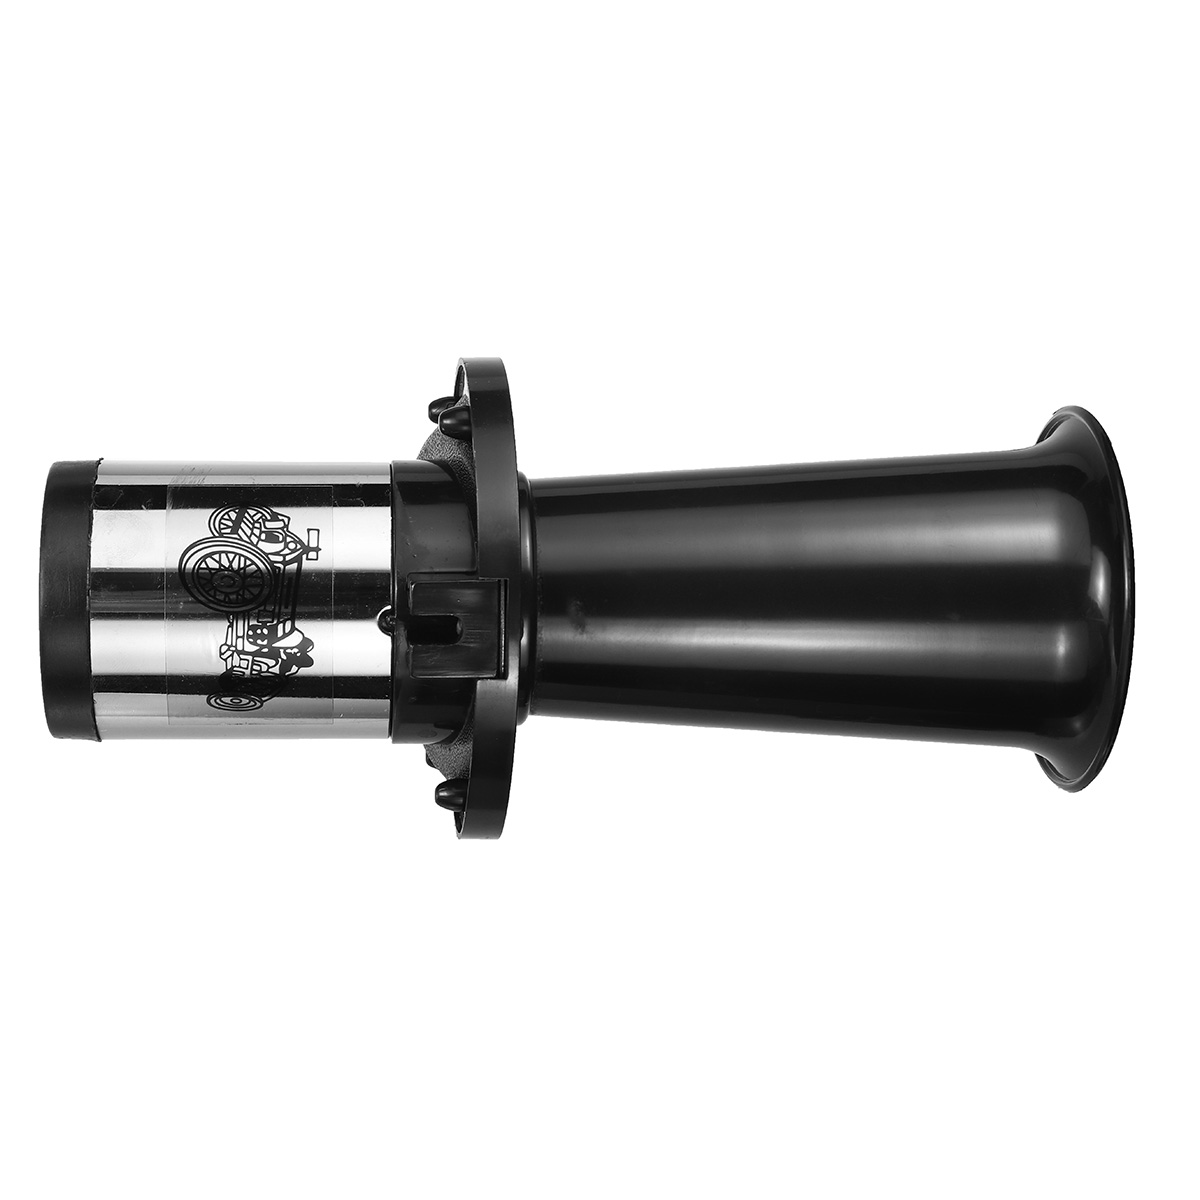 12V 110Db Electirc Air Horn Vintage Classical Model T Style Old School Black for Truck Car Motorcycle Boat